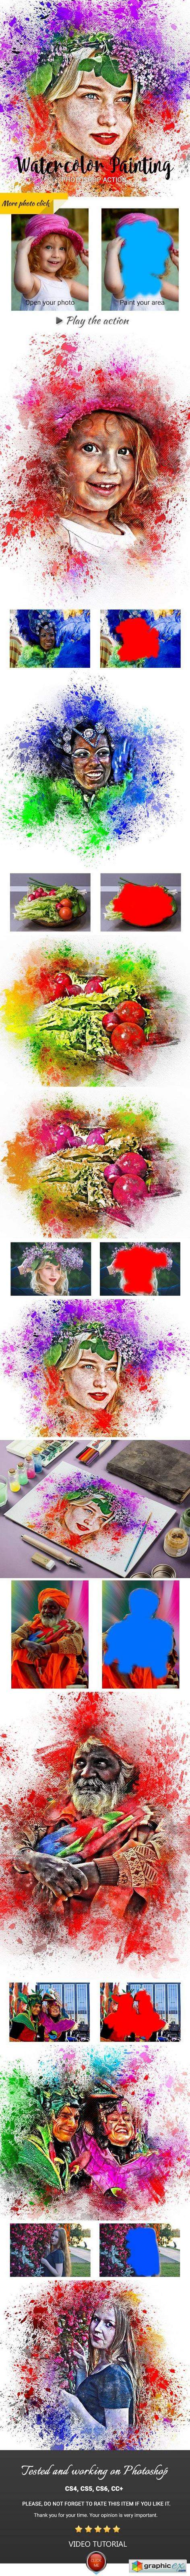 Watercolor Painting Photoshop Action 24202737